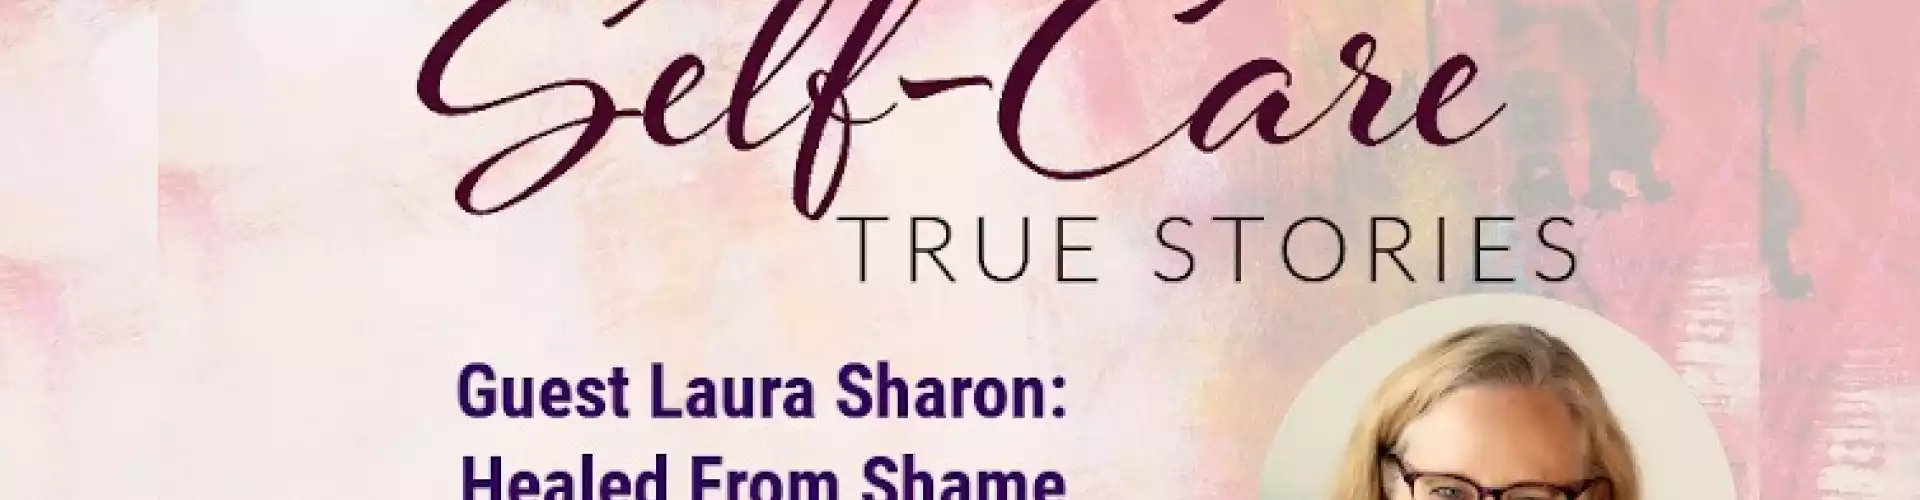 Self-Care True Stories with Guest Laura Sharon: Healed From Shame